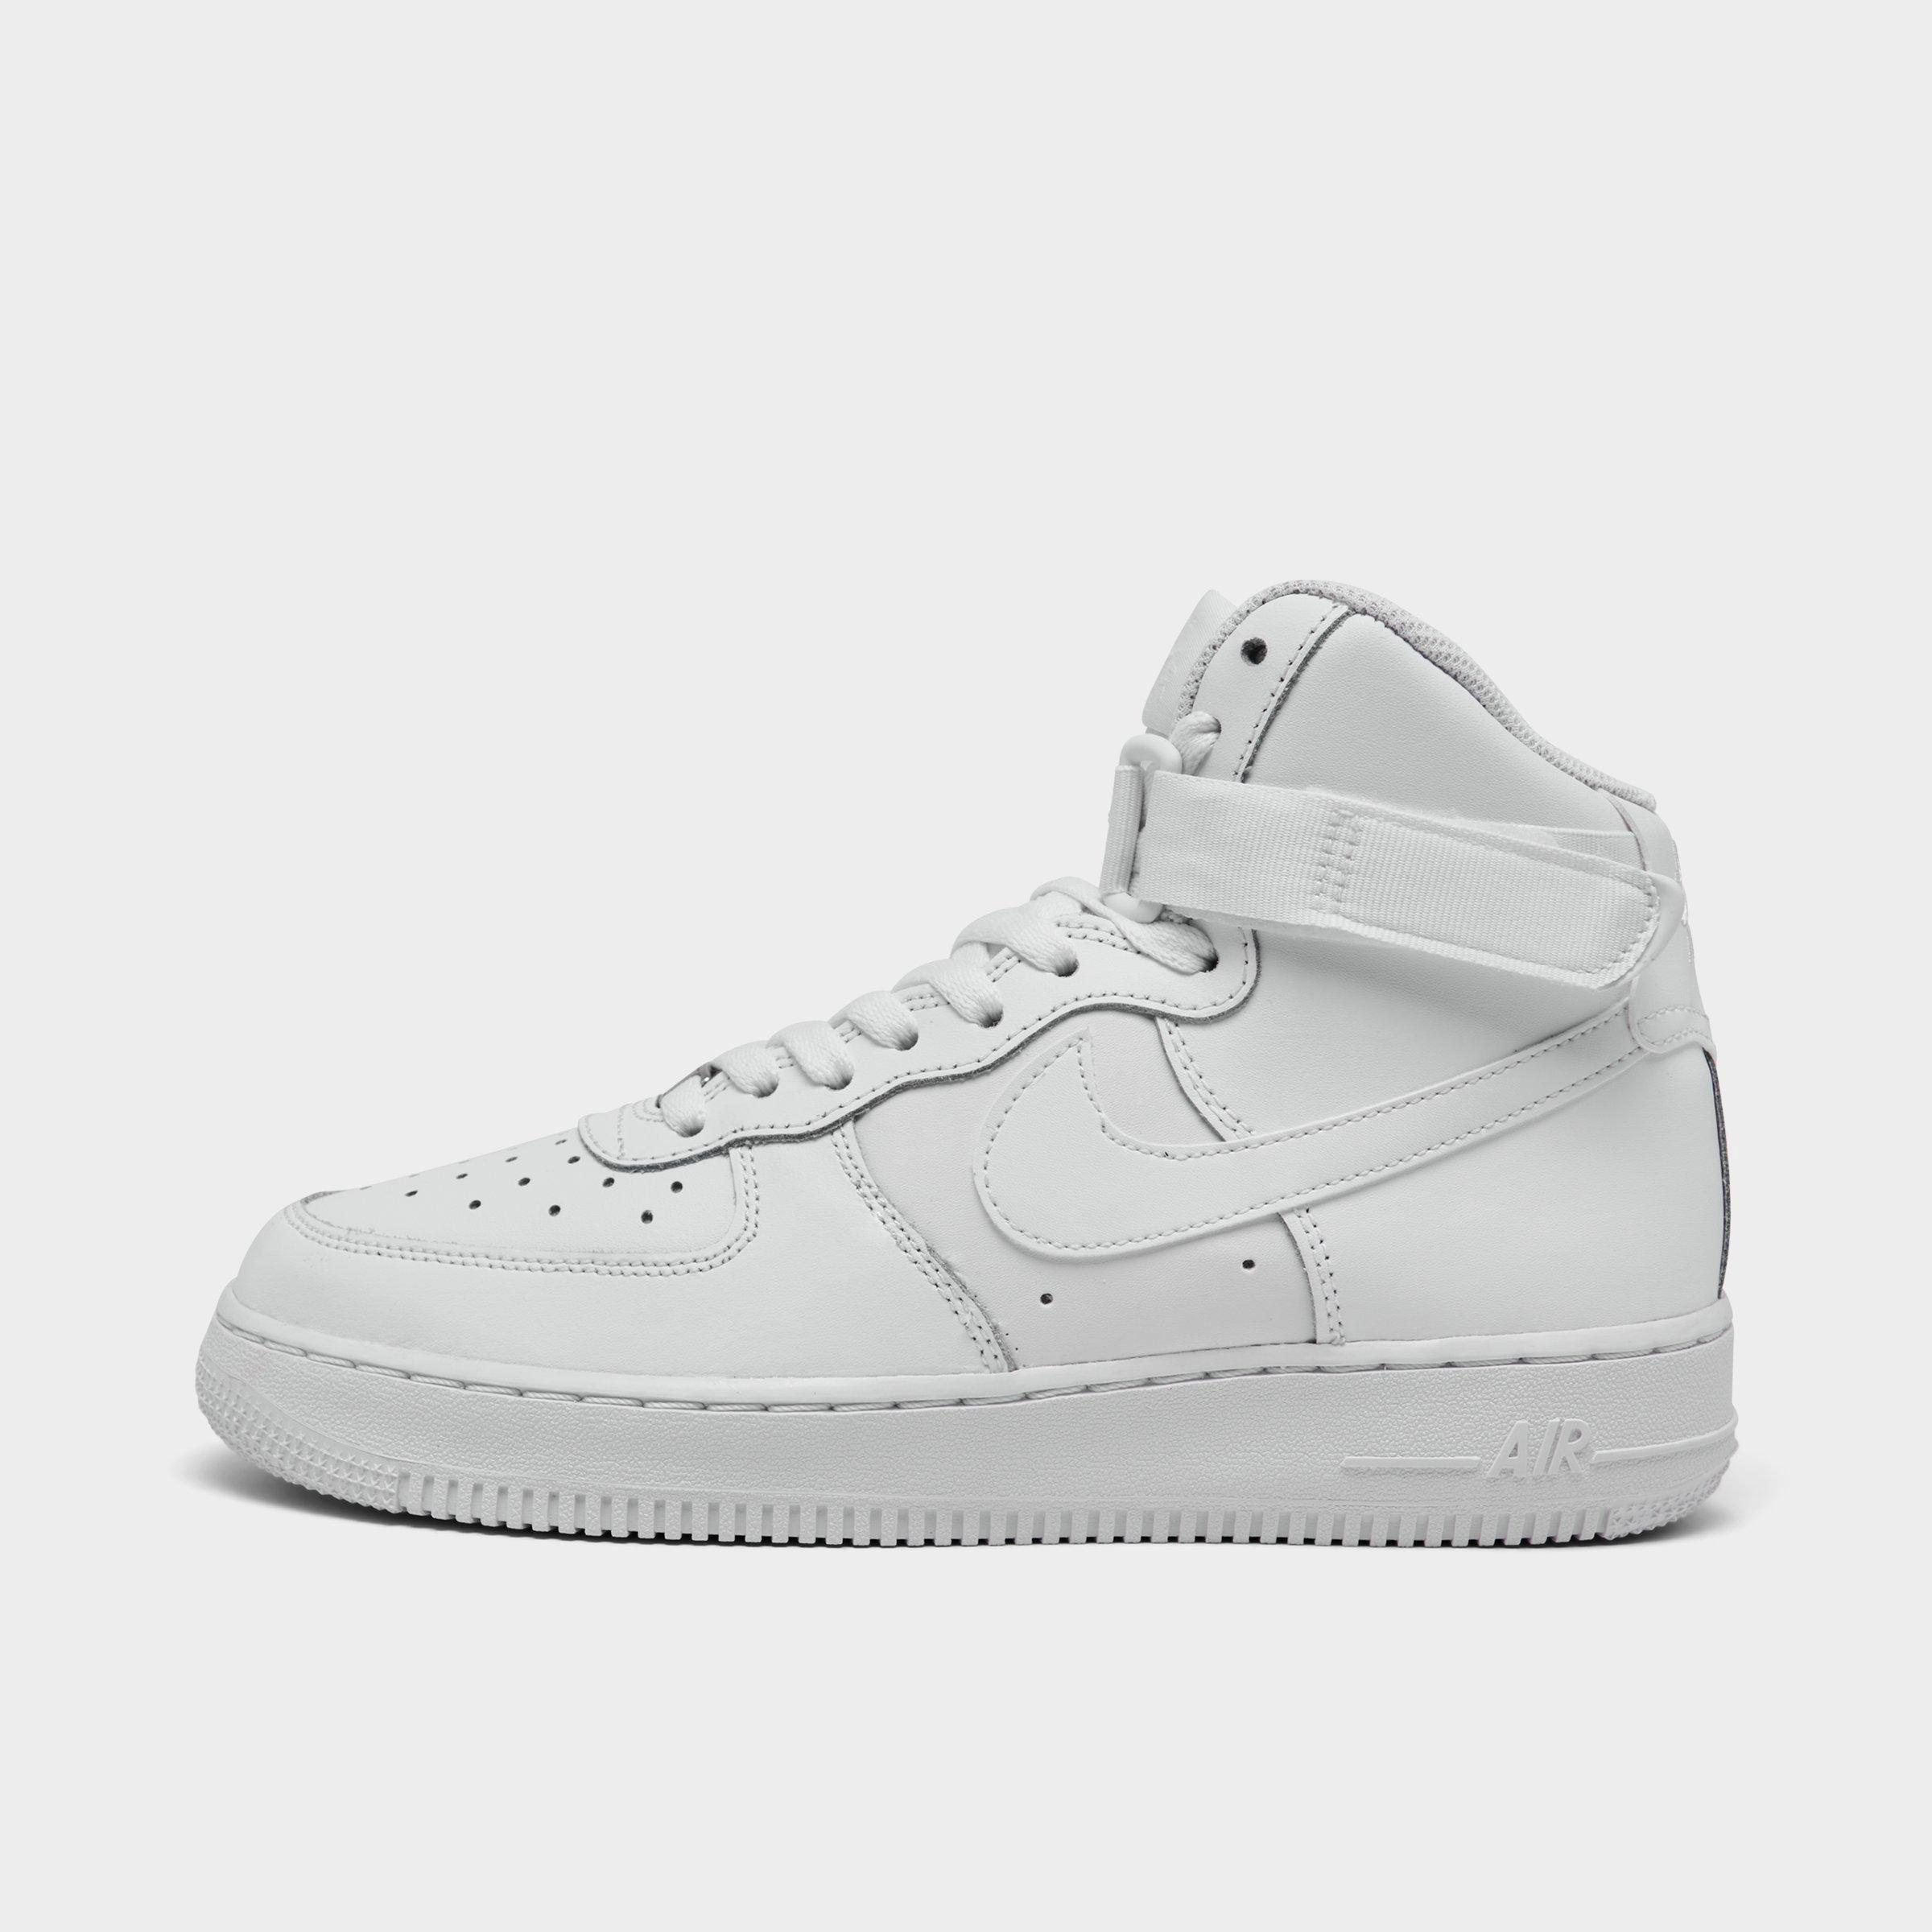 white air force ones in stock near me